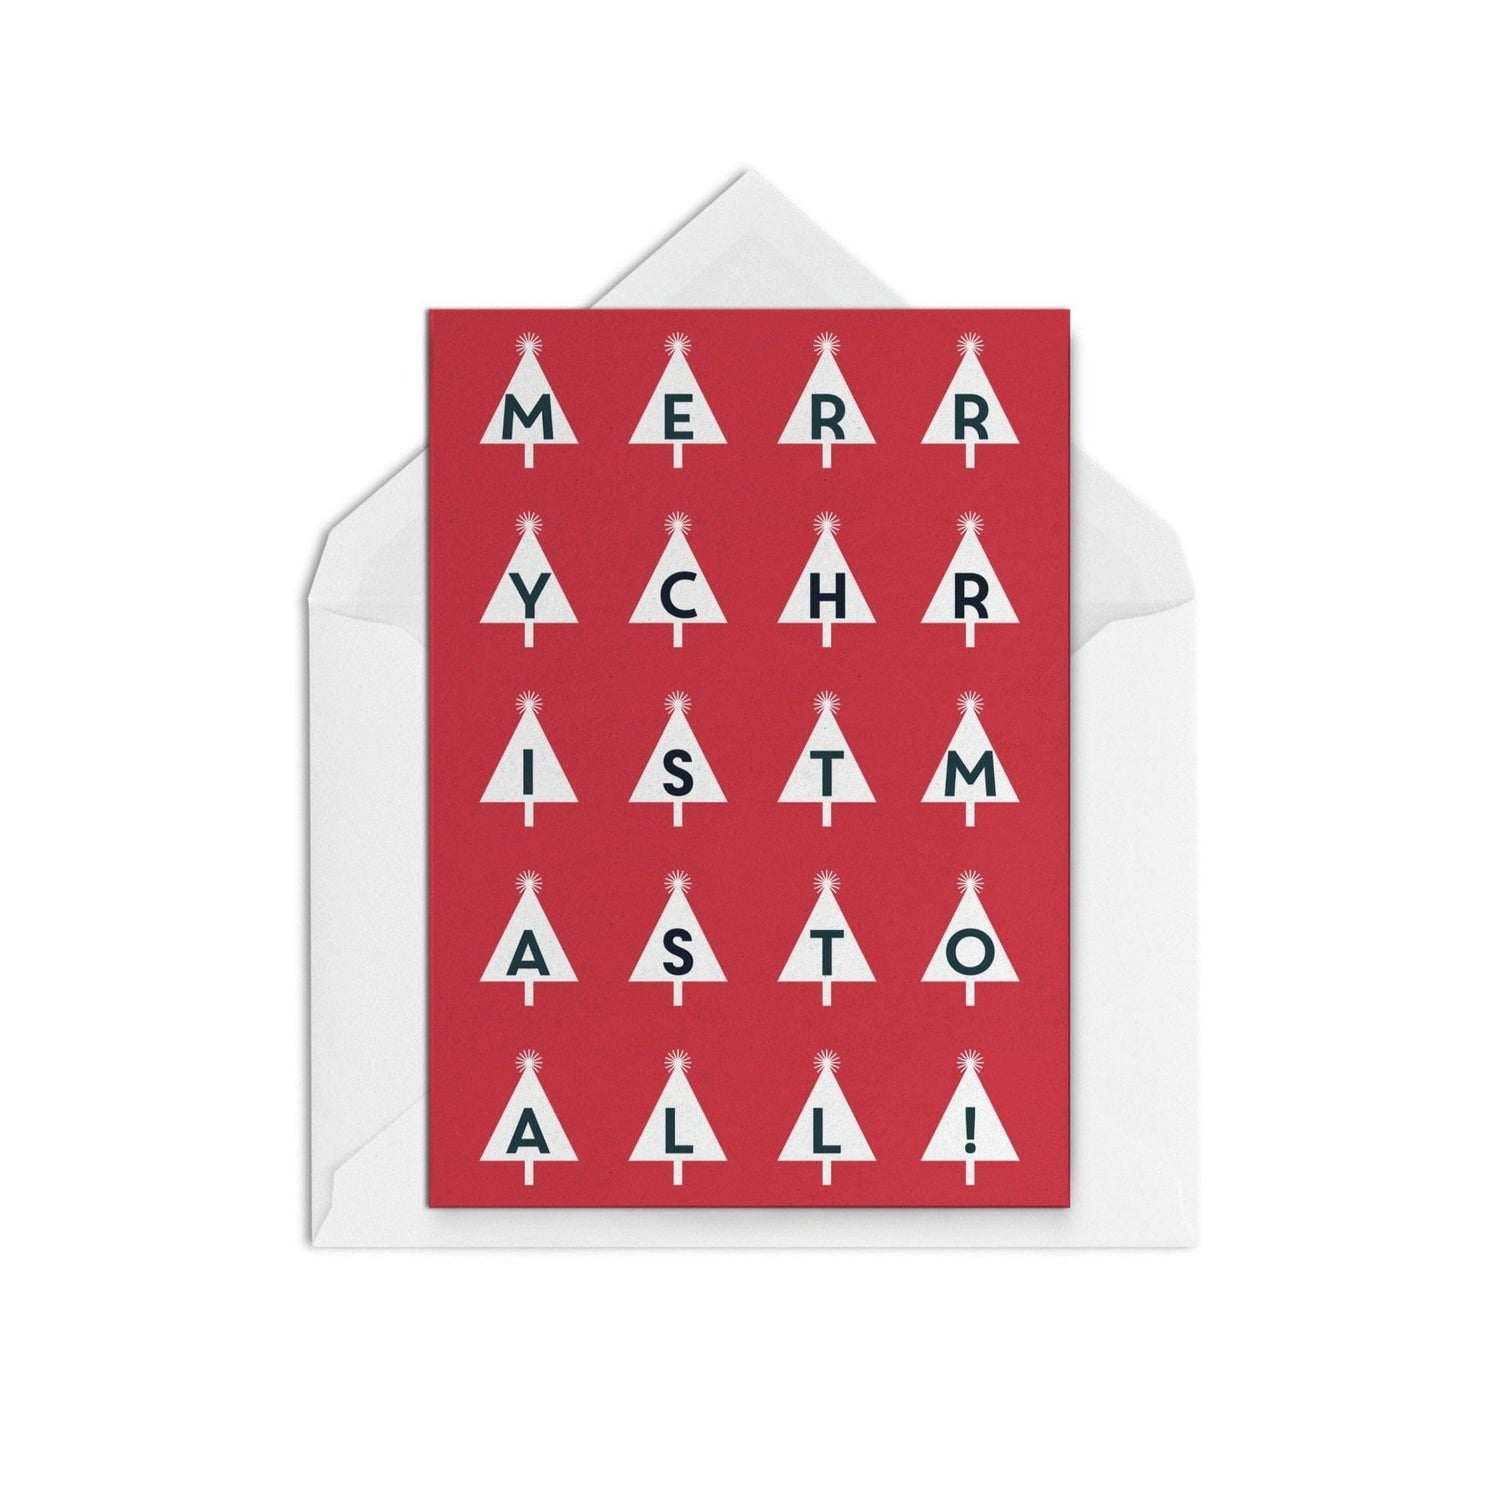 Merry Trees - The Paper People Greeting Cards